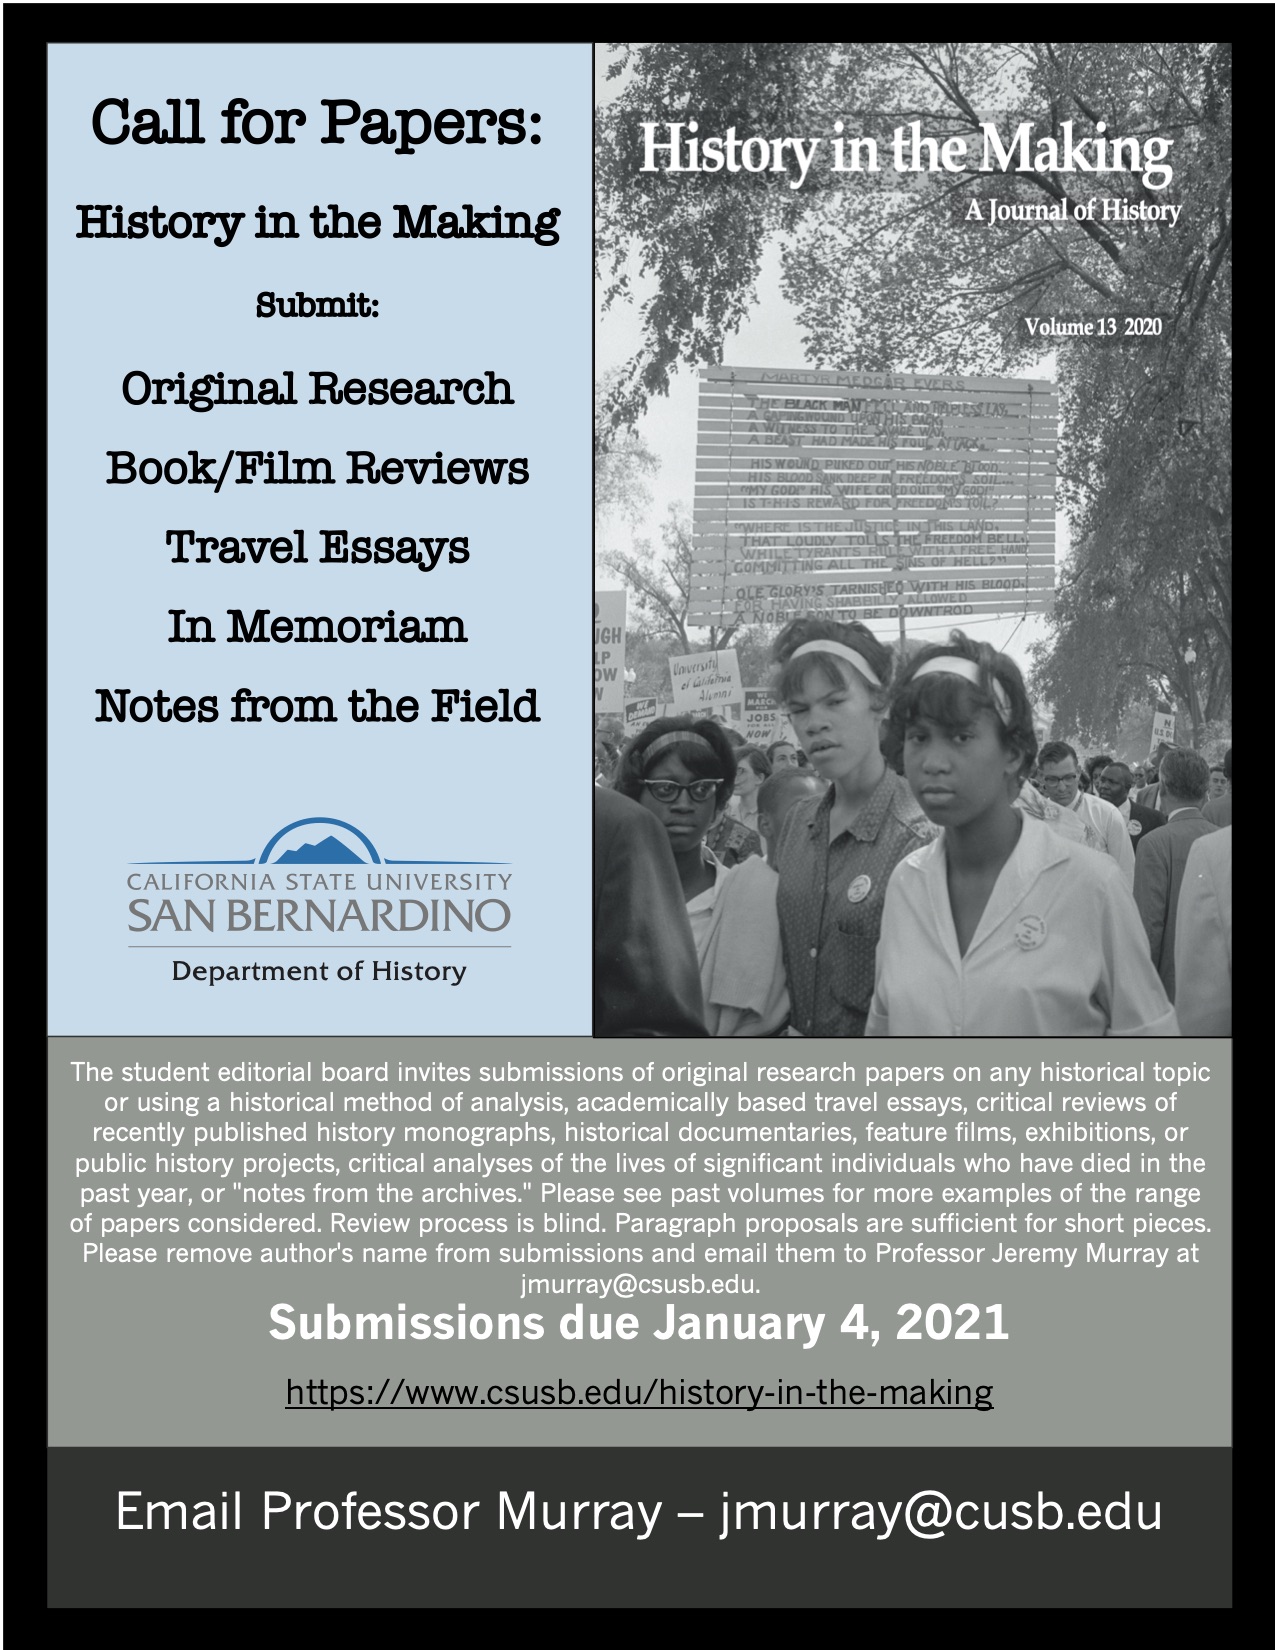 Call for Papers, History in the Making